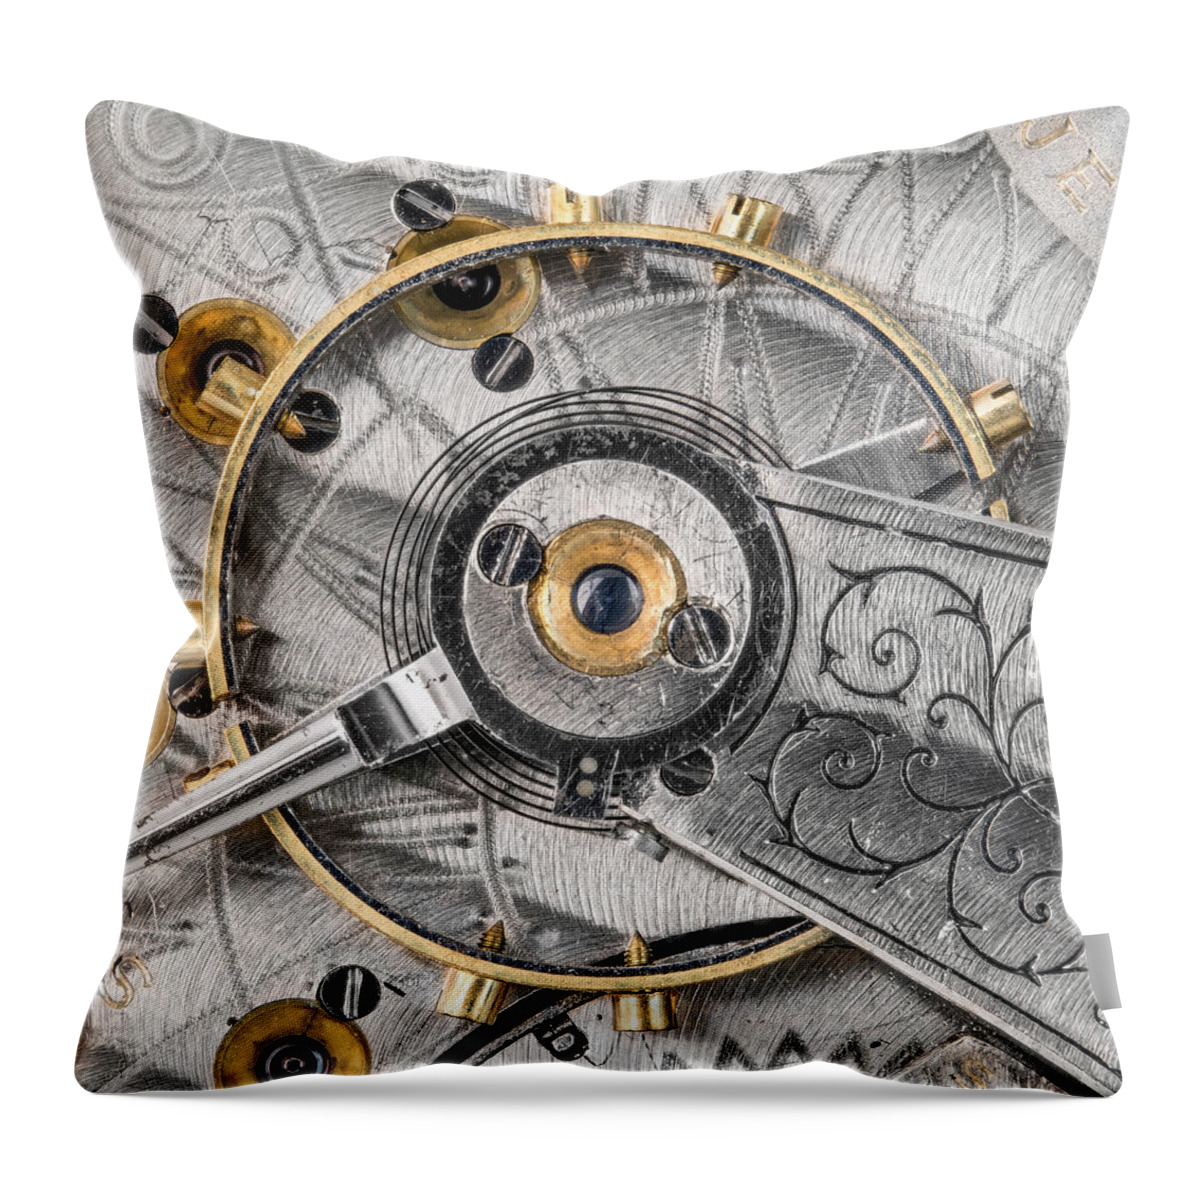 Watch Throw Pillow featuring the photograph Balance wheel of an antique pocketwatch by Jim Hughes